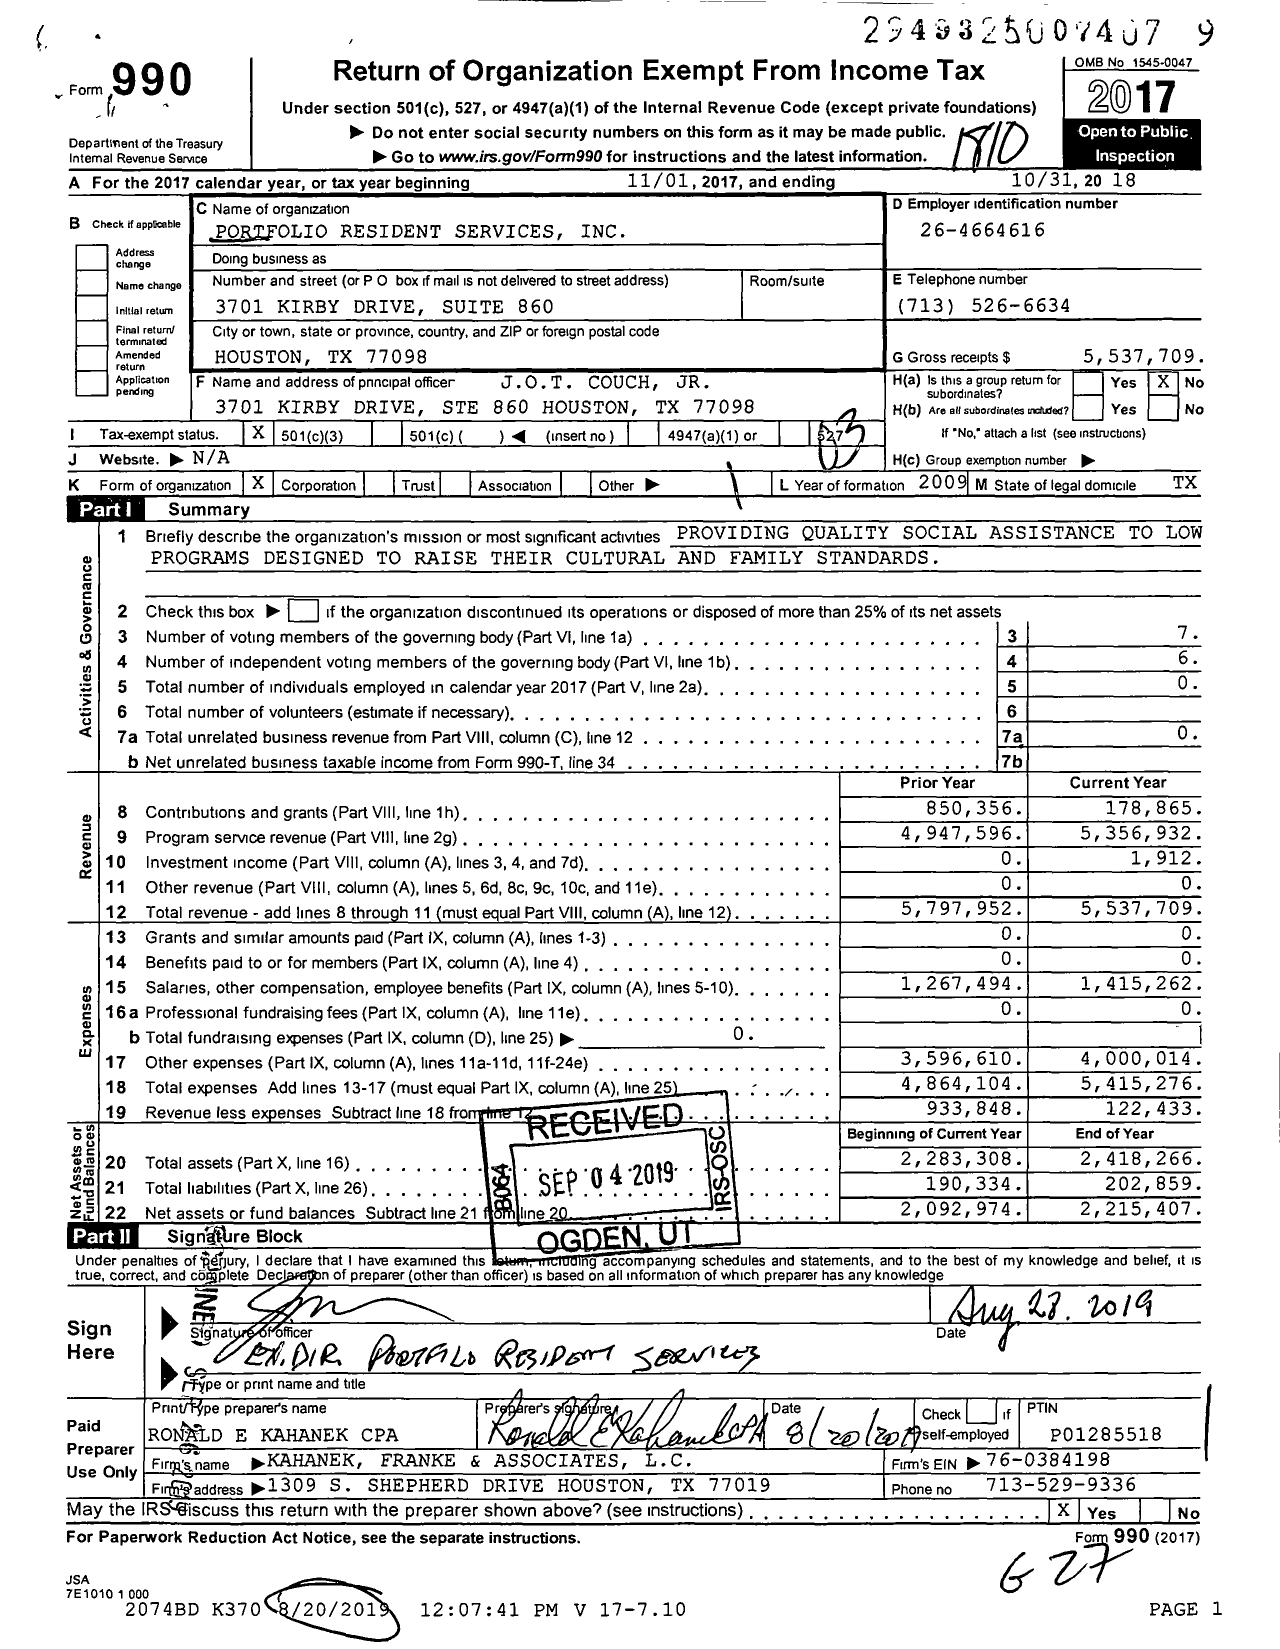 Image of first page of 2017 Form 990 for Portfolio Resident Services (PRS)